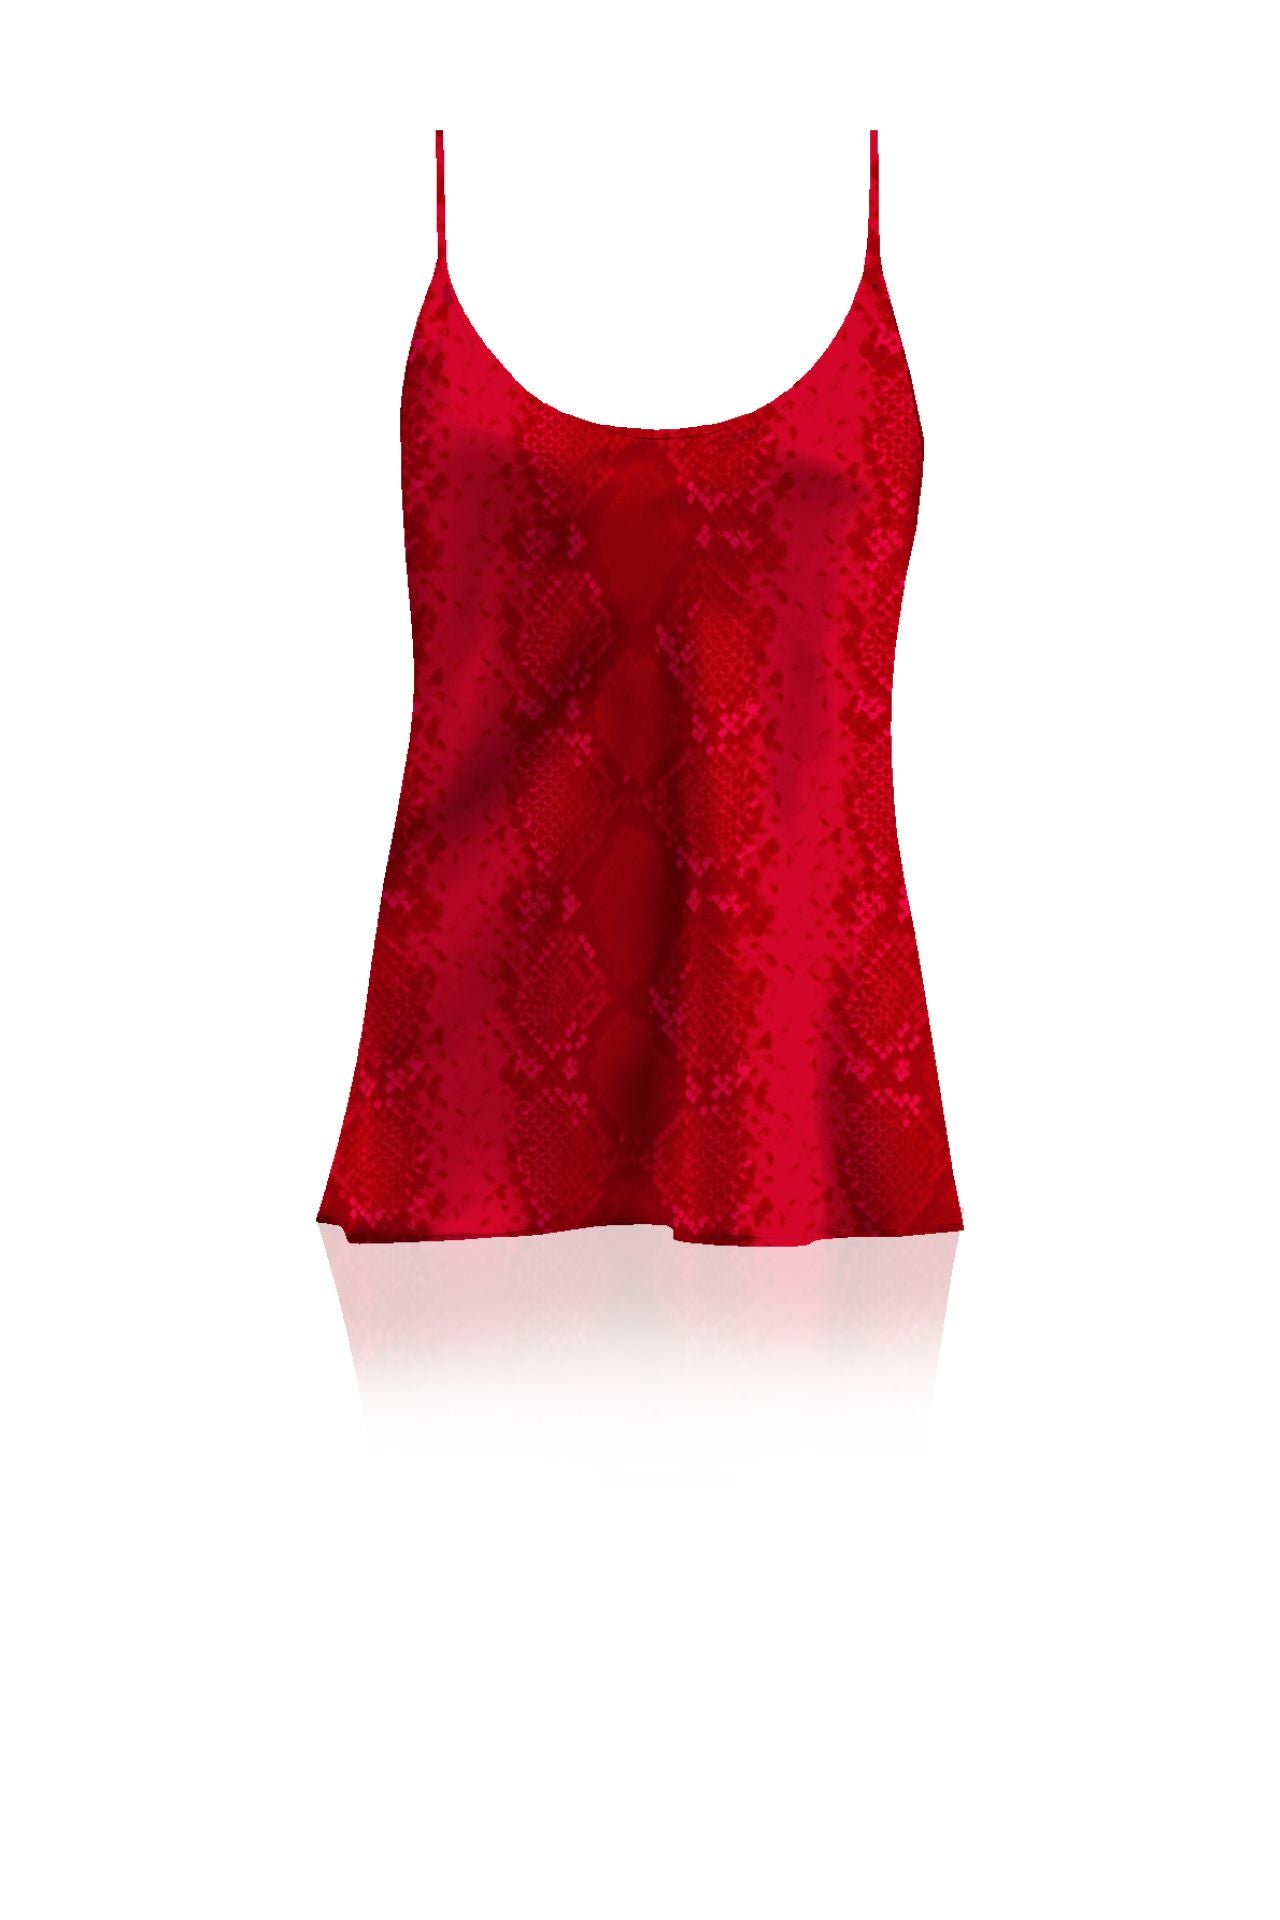 Silk Camisole Top  in Blood Stone Made with Sustainable Cupro